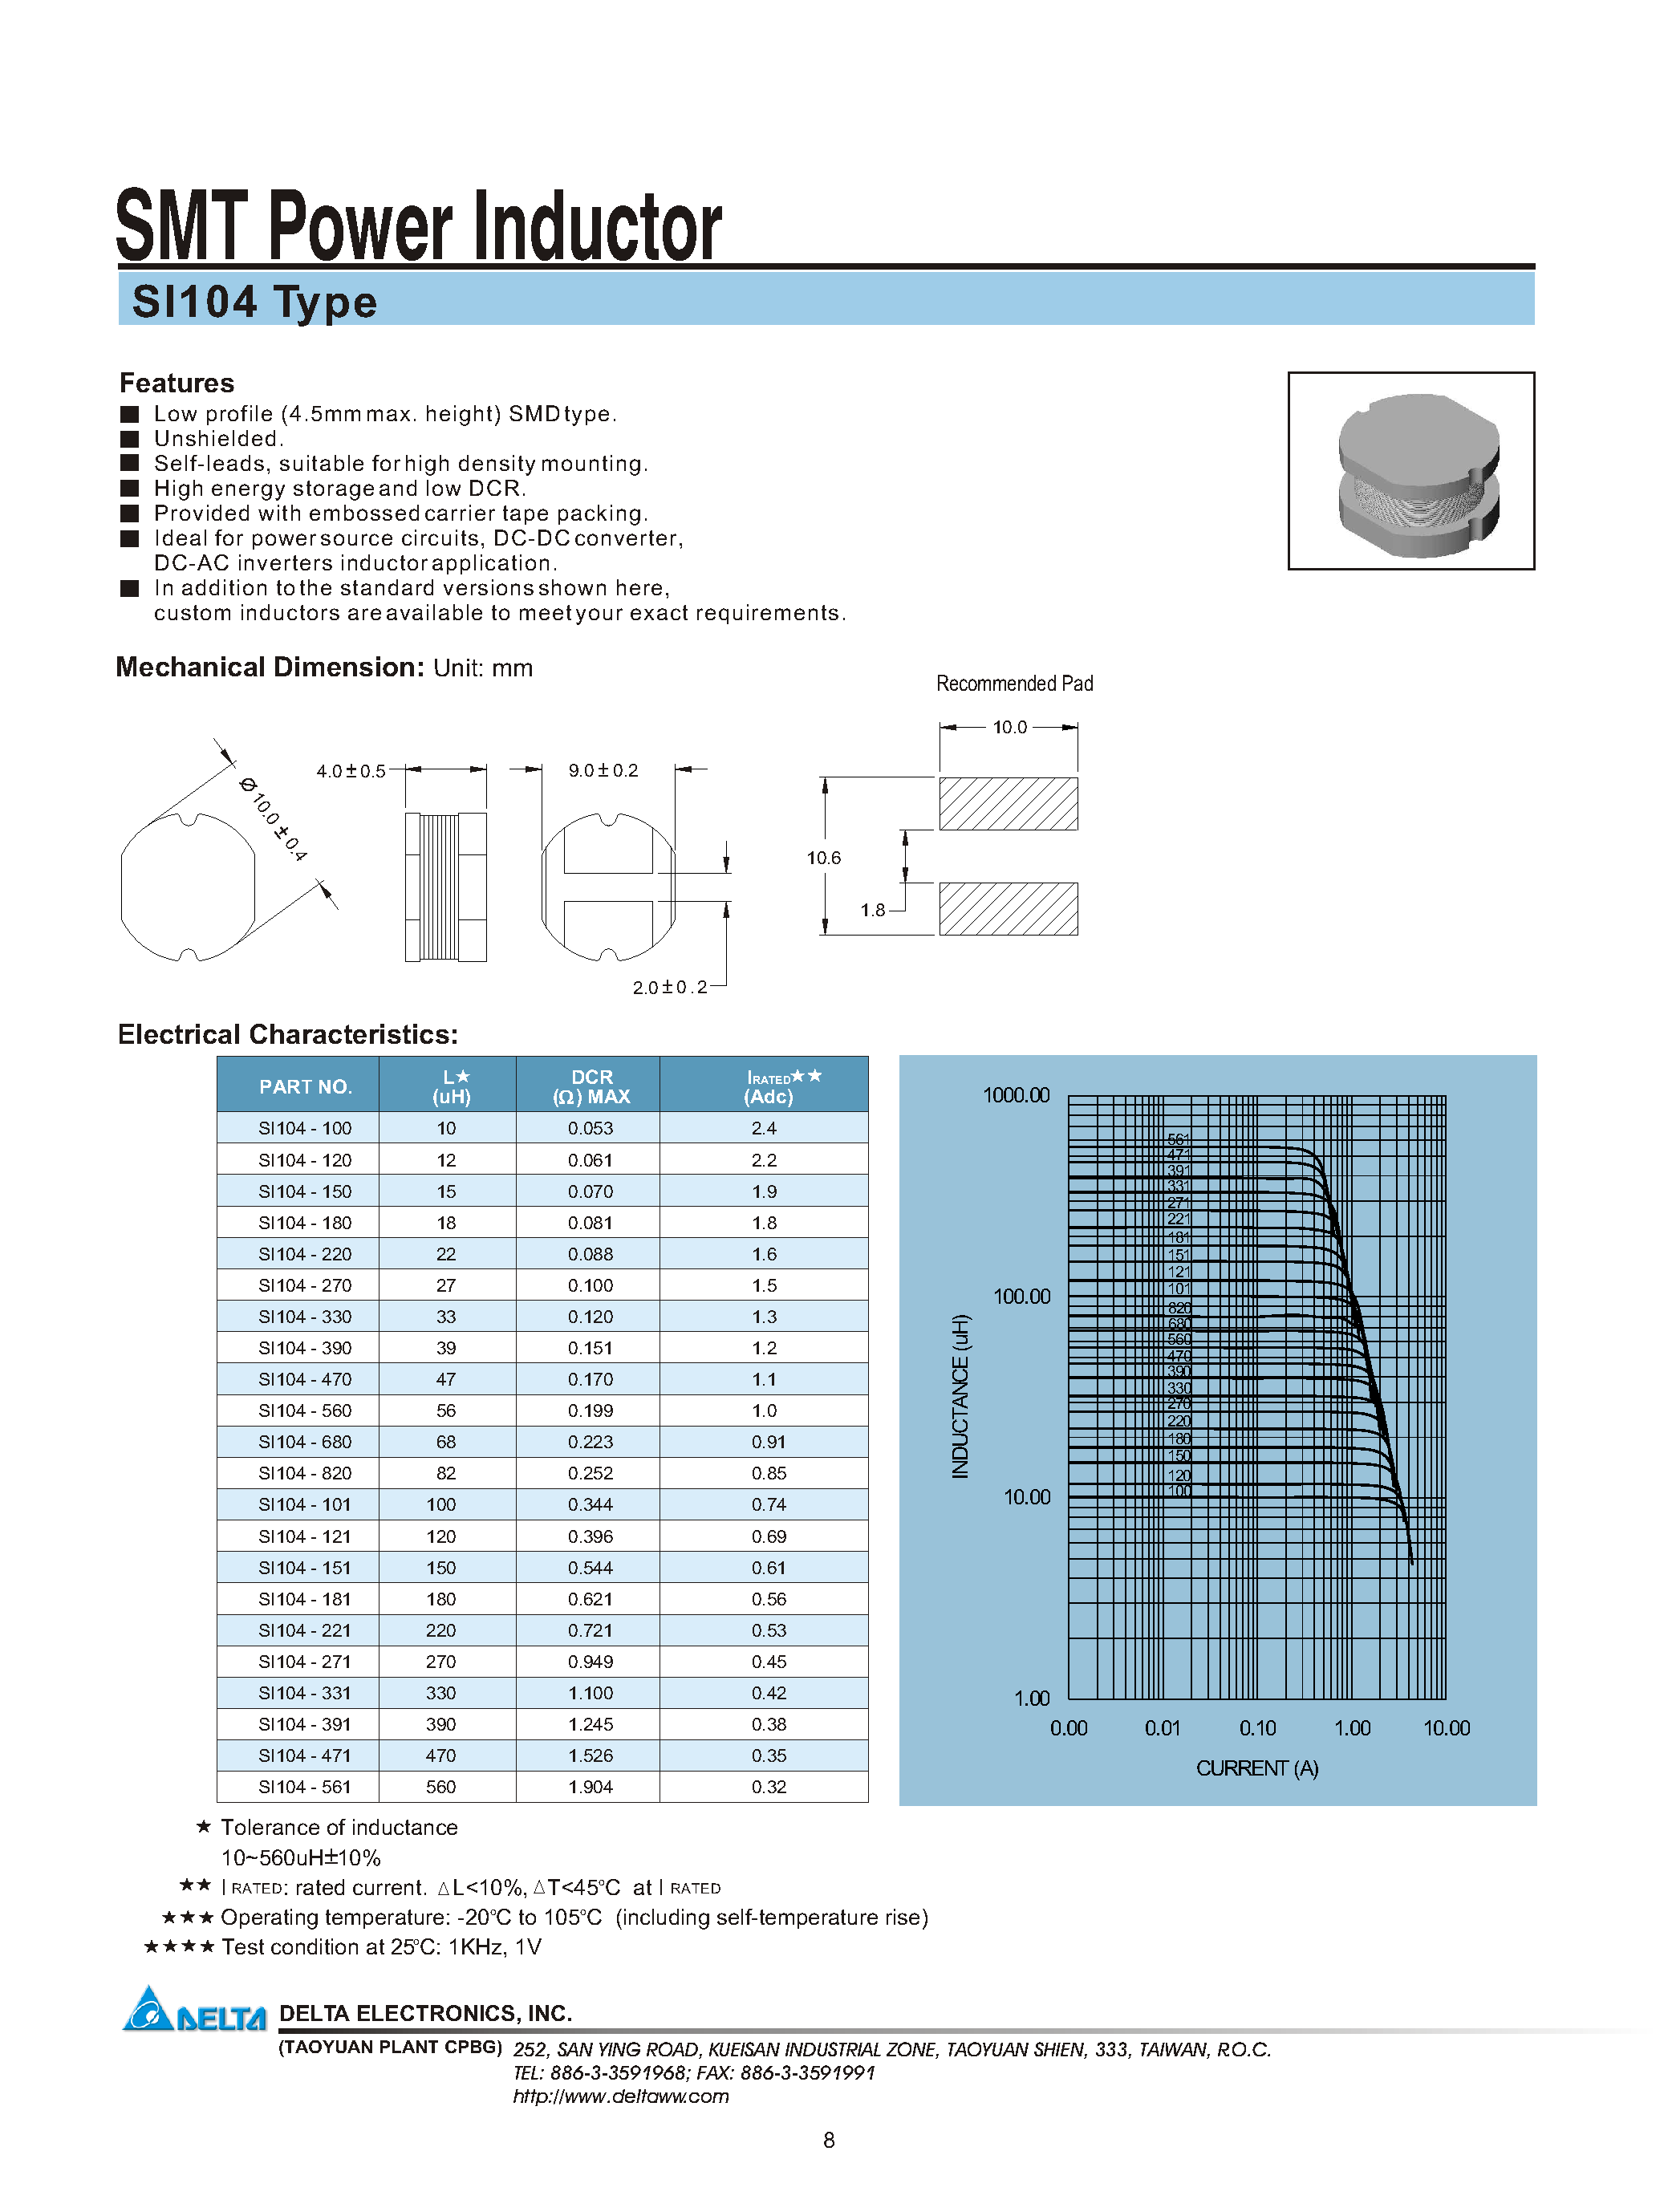 Datasheet SI104-470 - SMT Power Inductor page 1